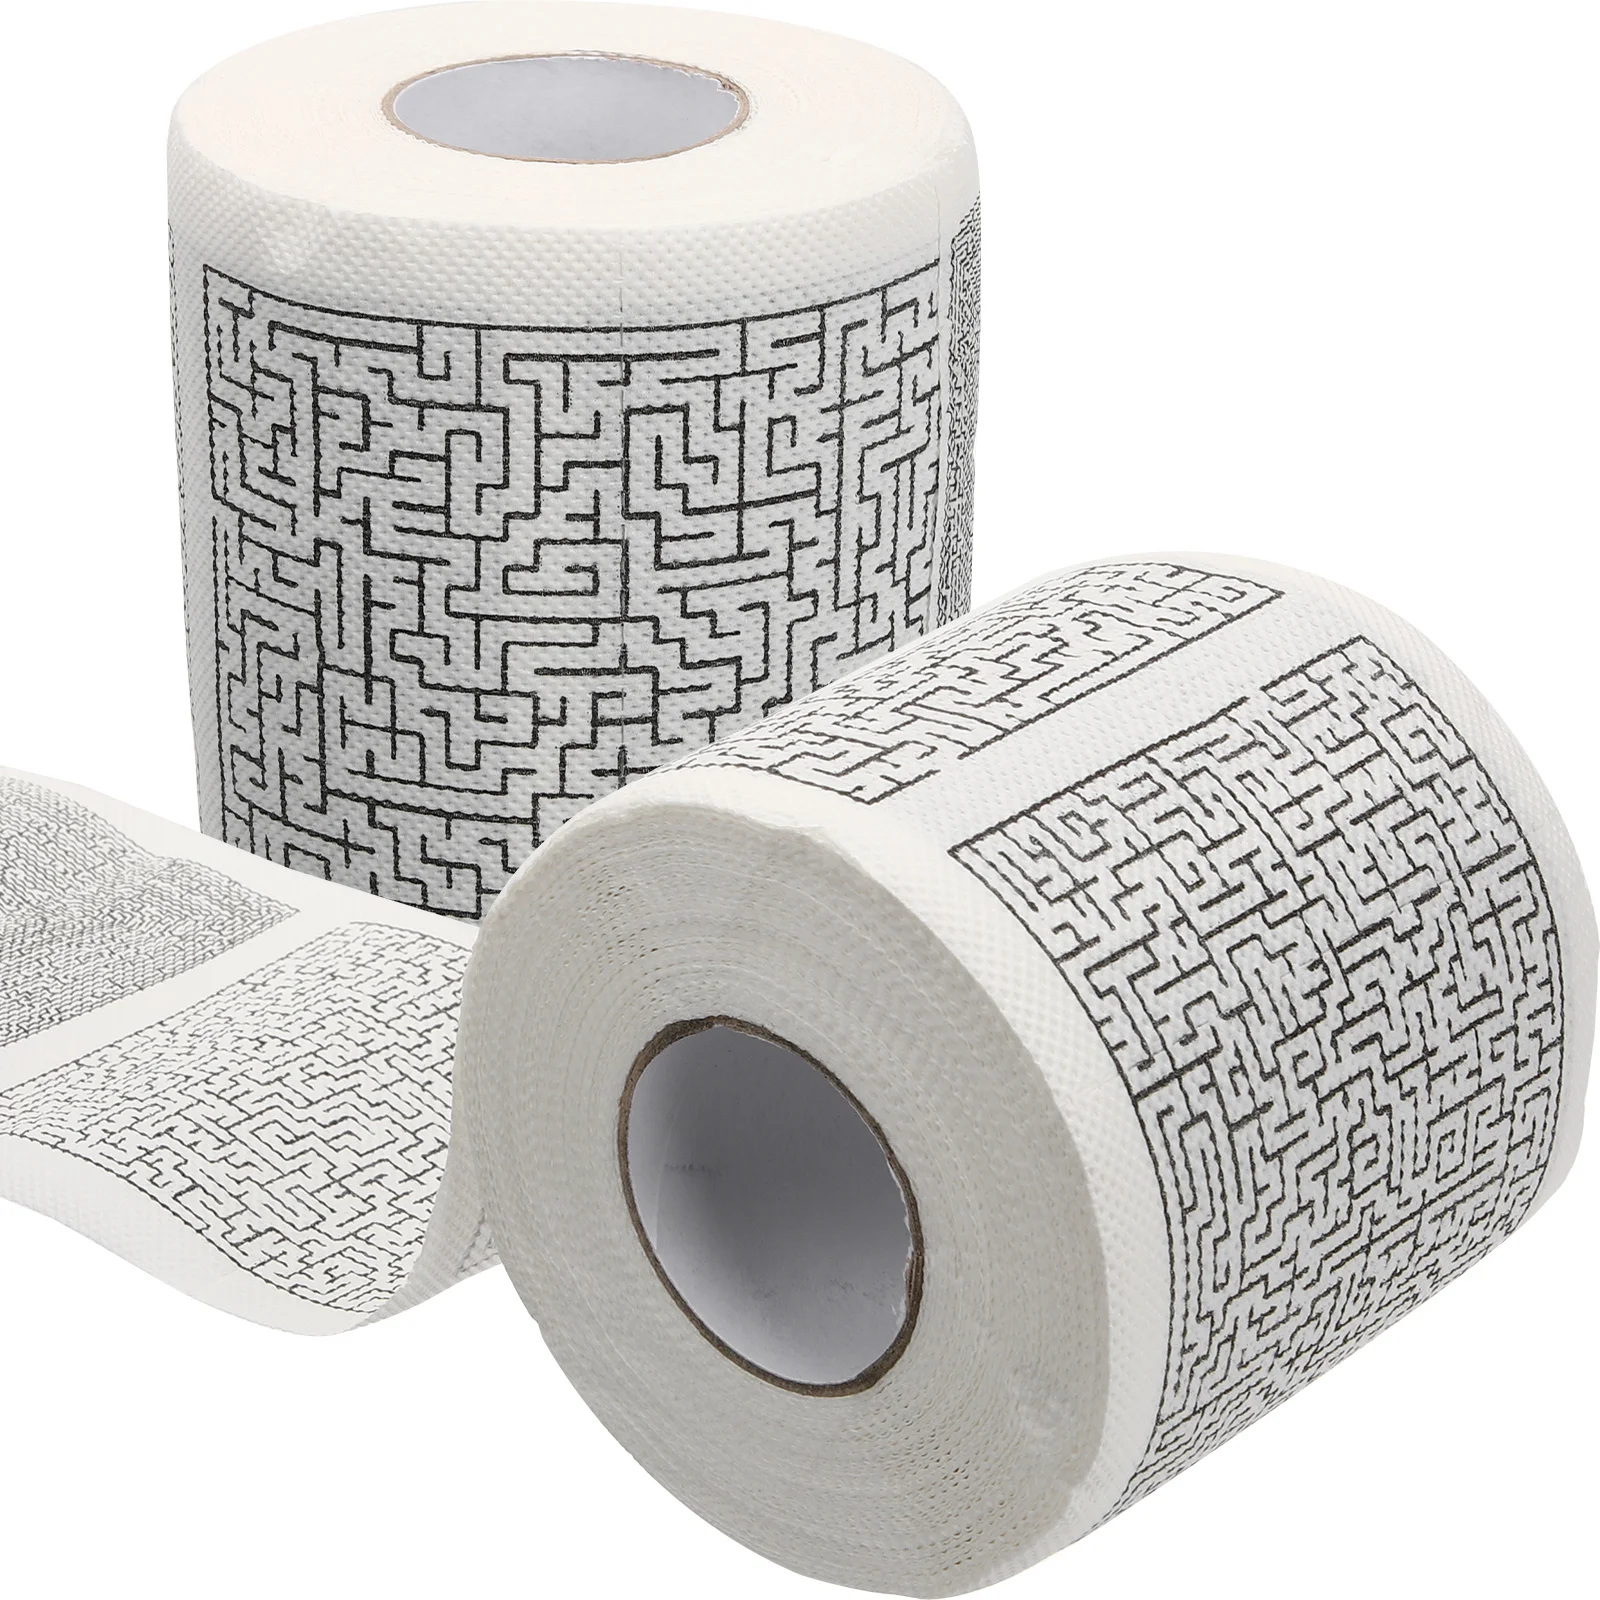 

2 Rolls Printed Toilet Paper Maze Printing Used Papers Colorful Tissue Supple Romantic Gifts Bathroom Napkins Soft Pattern